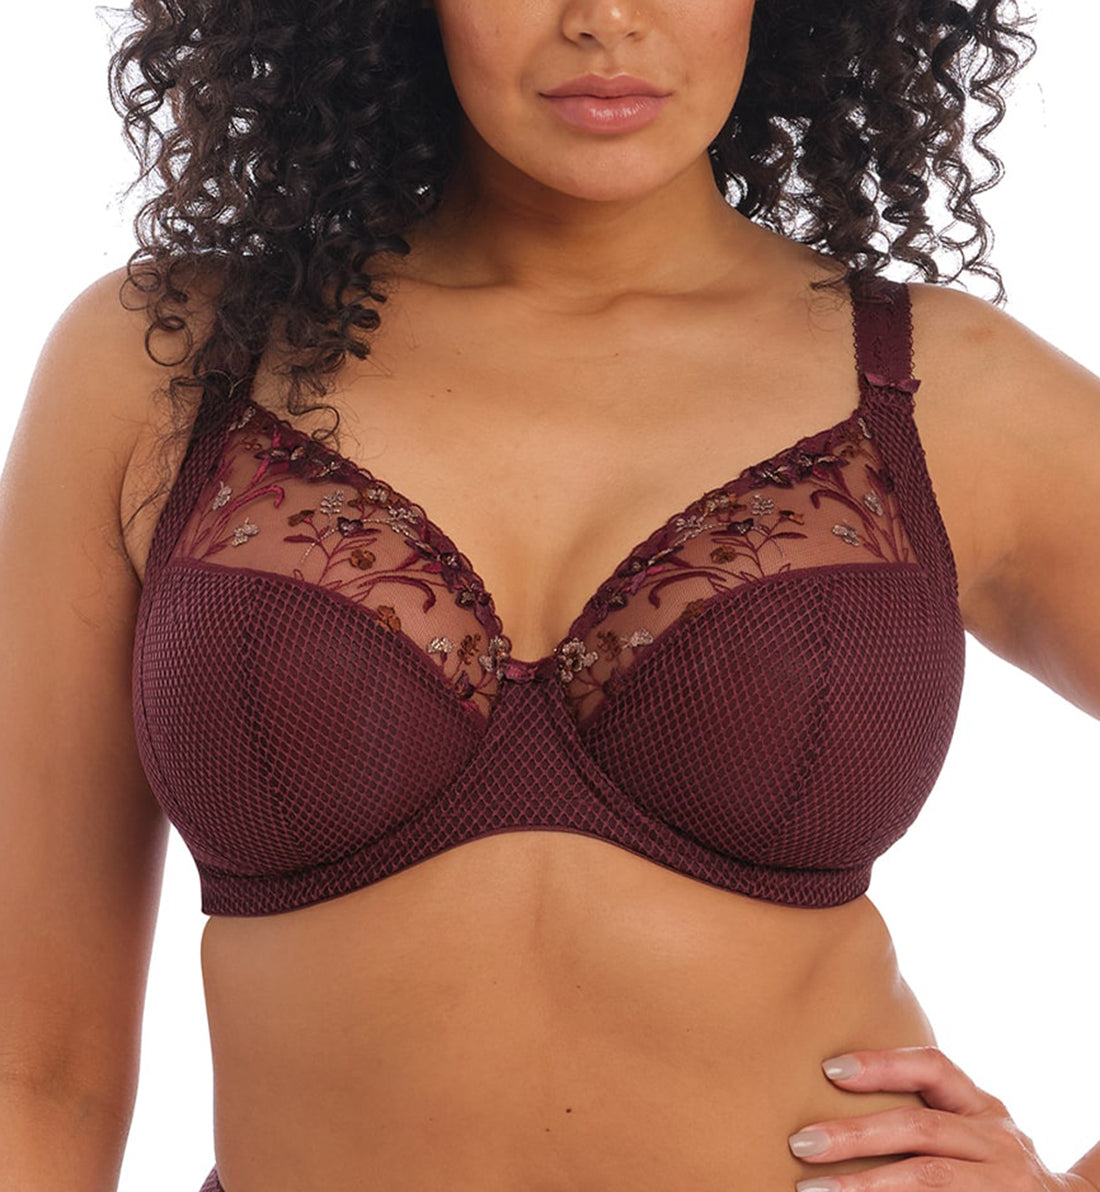 32JJ Bra Size in Fawn J-Hook, Larger Cup and Three Section Cup Bras